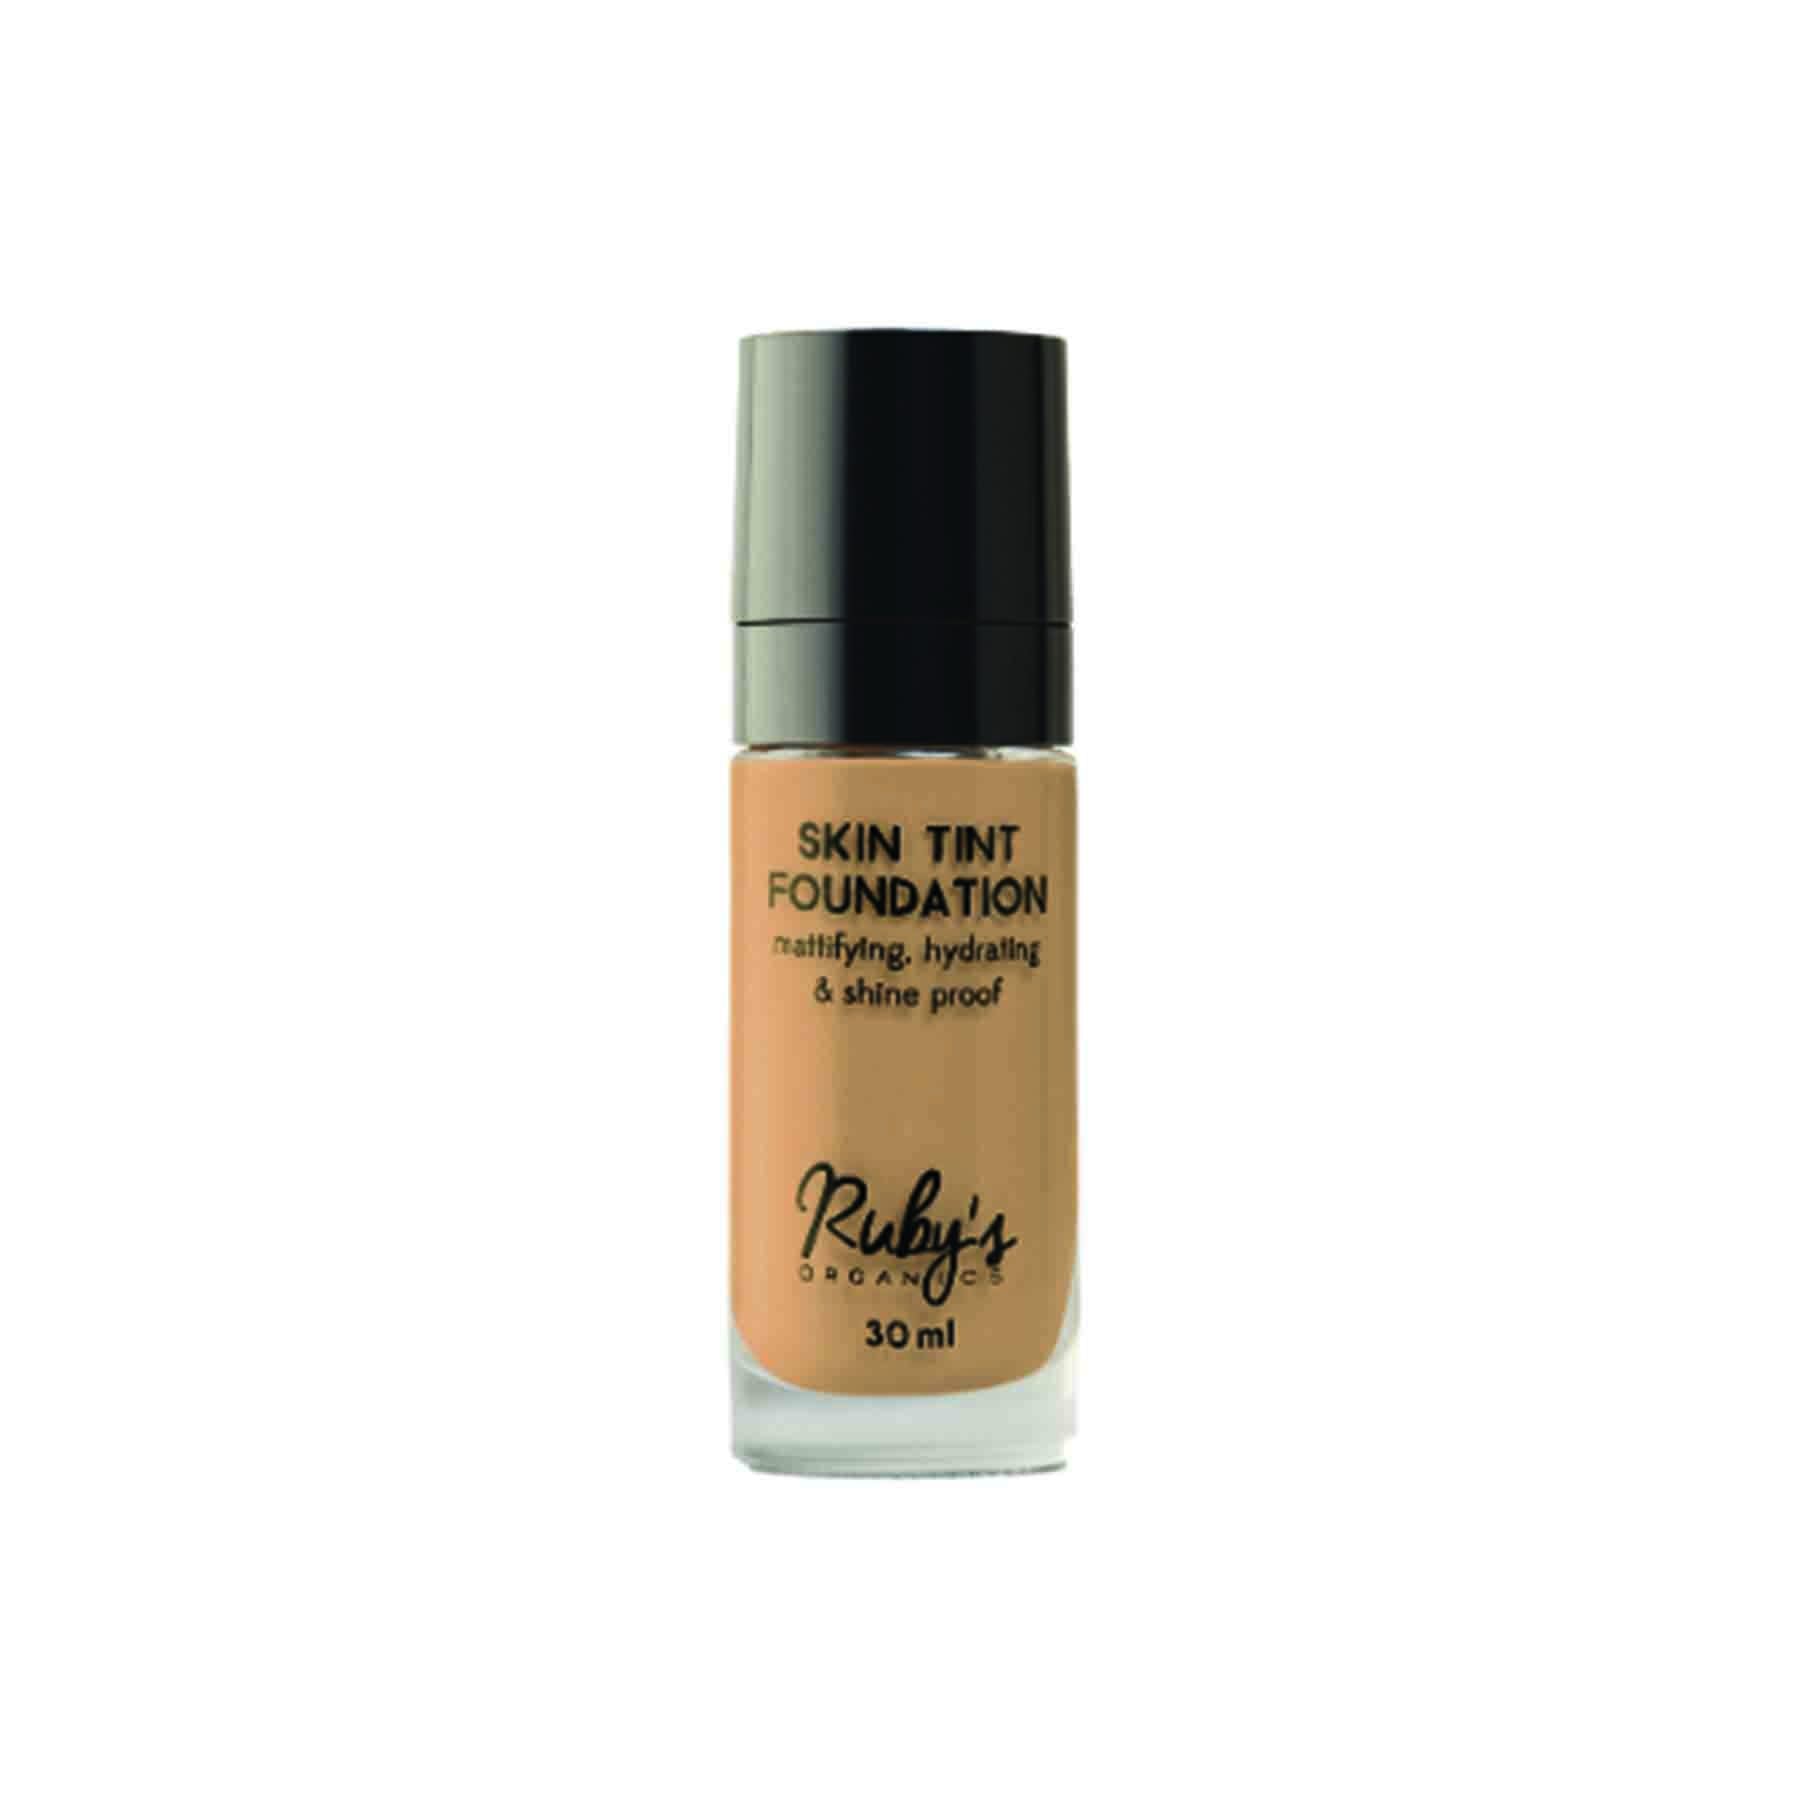 Shop Ruby's organics LM 1.8 -Skin-tint mattifying foundation from Sublime Life. Suitable for all skin types.